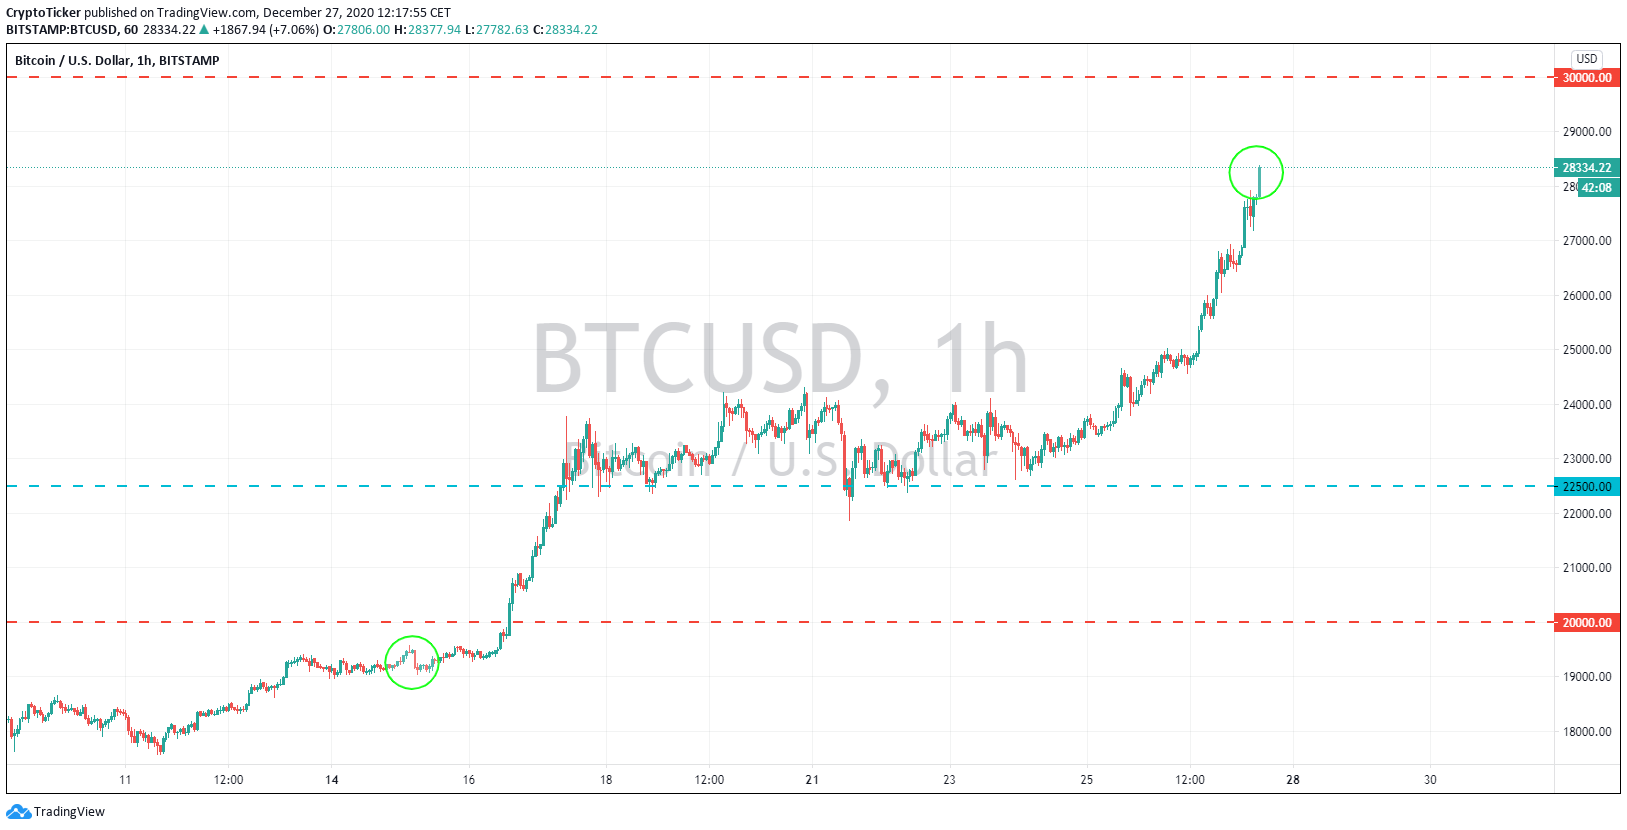 BTC/USD 1-Hour chart, a USD 9,200 price increase in 2 weeks